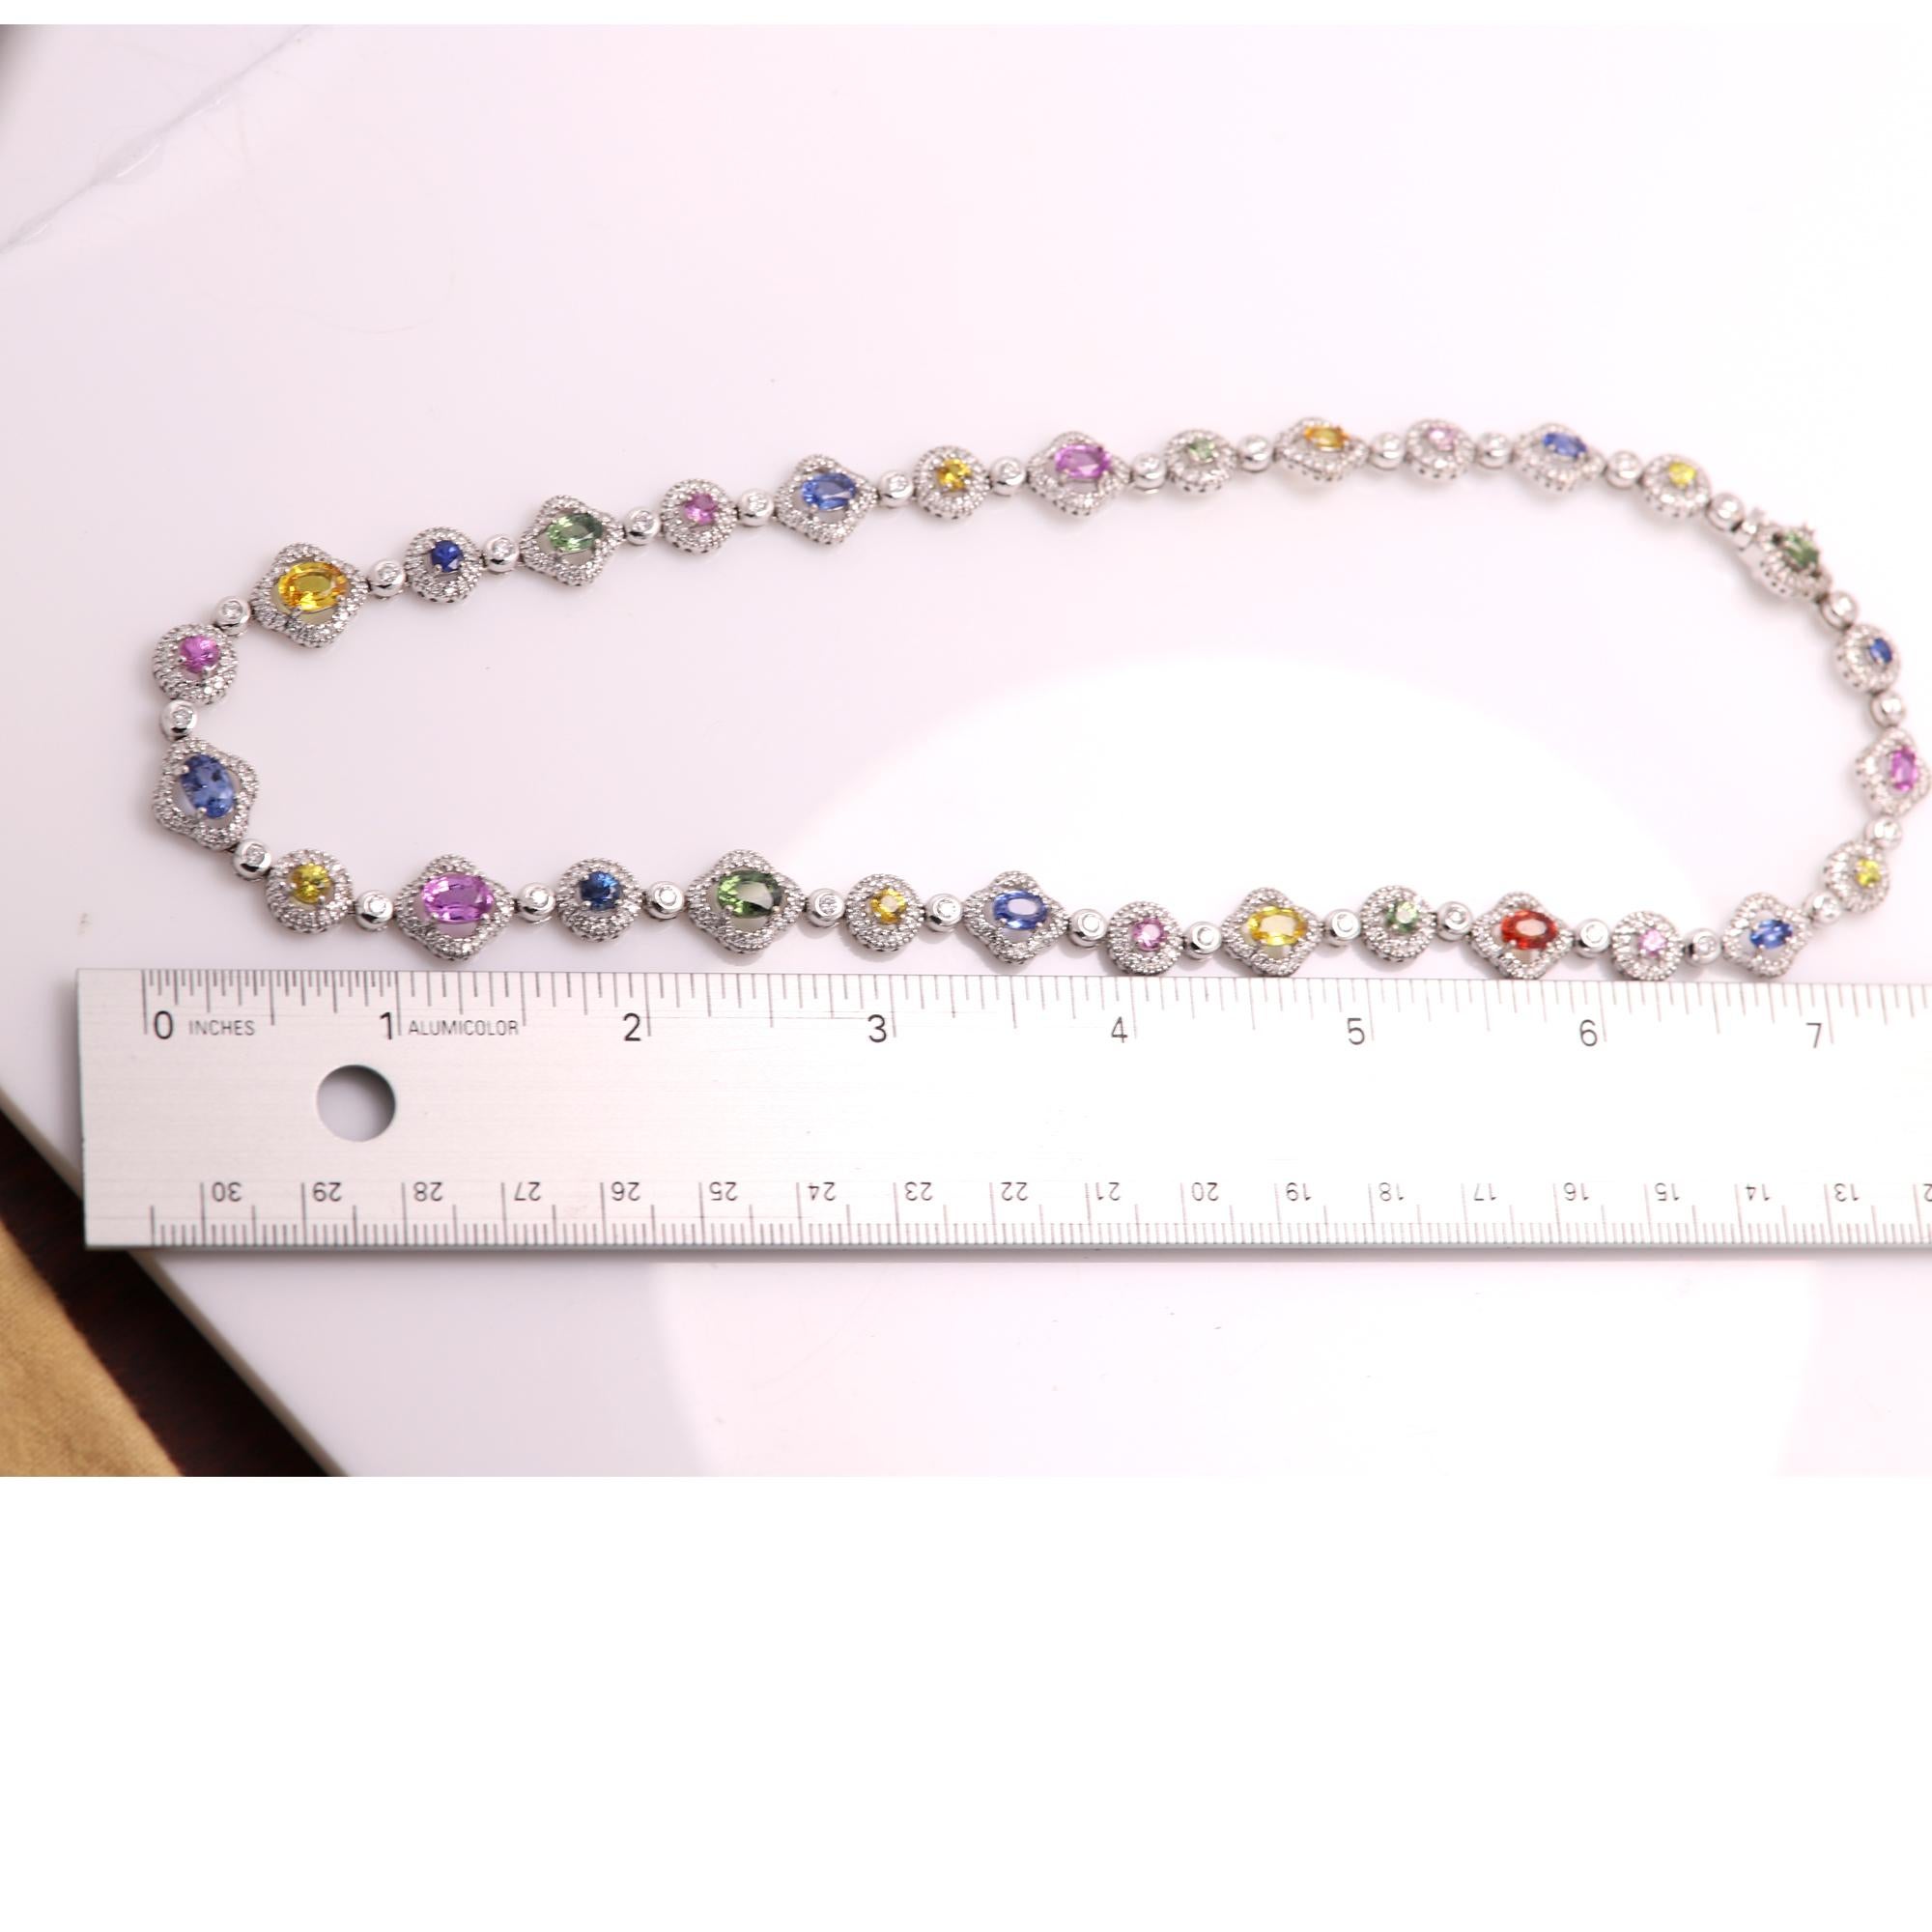 ONE-OF-A KIND SAPPHIRE NECKLACE
BRILLIANT COLORS - FANCY NATURAL GEMSTONE NECKLACE
18K WHITE GOLD  39 GRAMS
MULTI COLOR NATURAL SAPPHRIES PLUS NATURAL DIAMONDS
TOTAL NATURAL SAPPHIRES APPROX 9.50 CARAT  CLEAN NICE STONES ! AAA
TOTAL NATURAL DIAMONDS